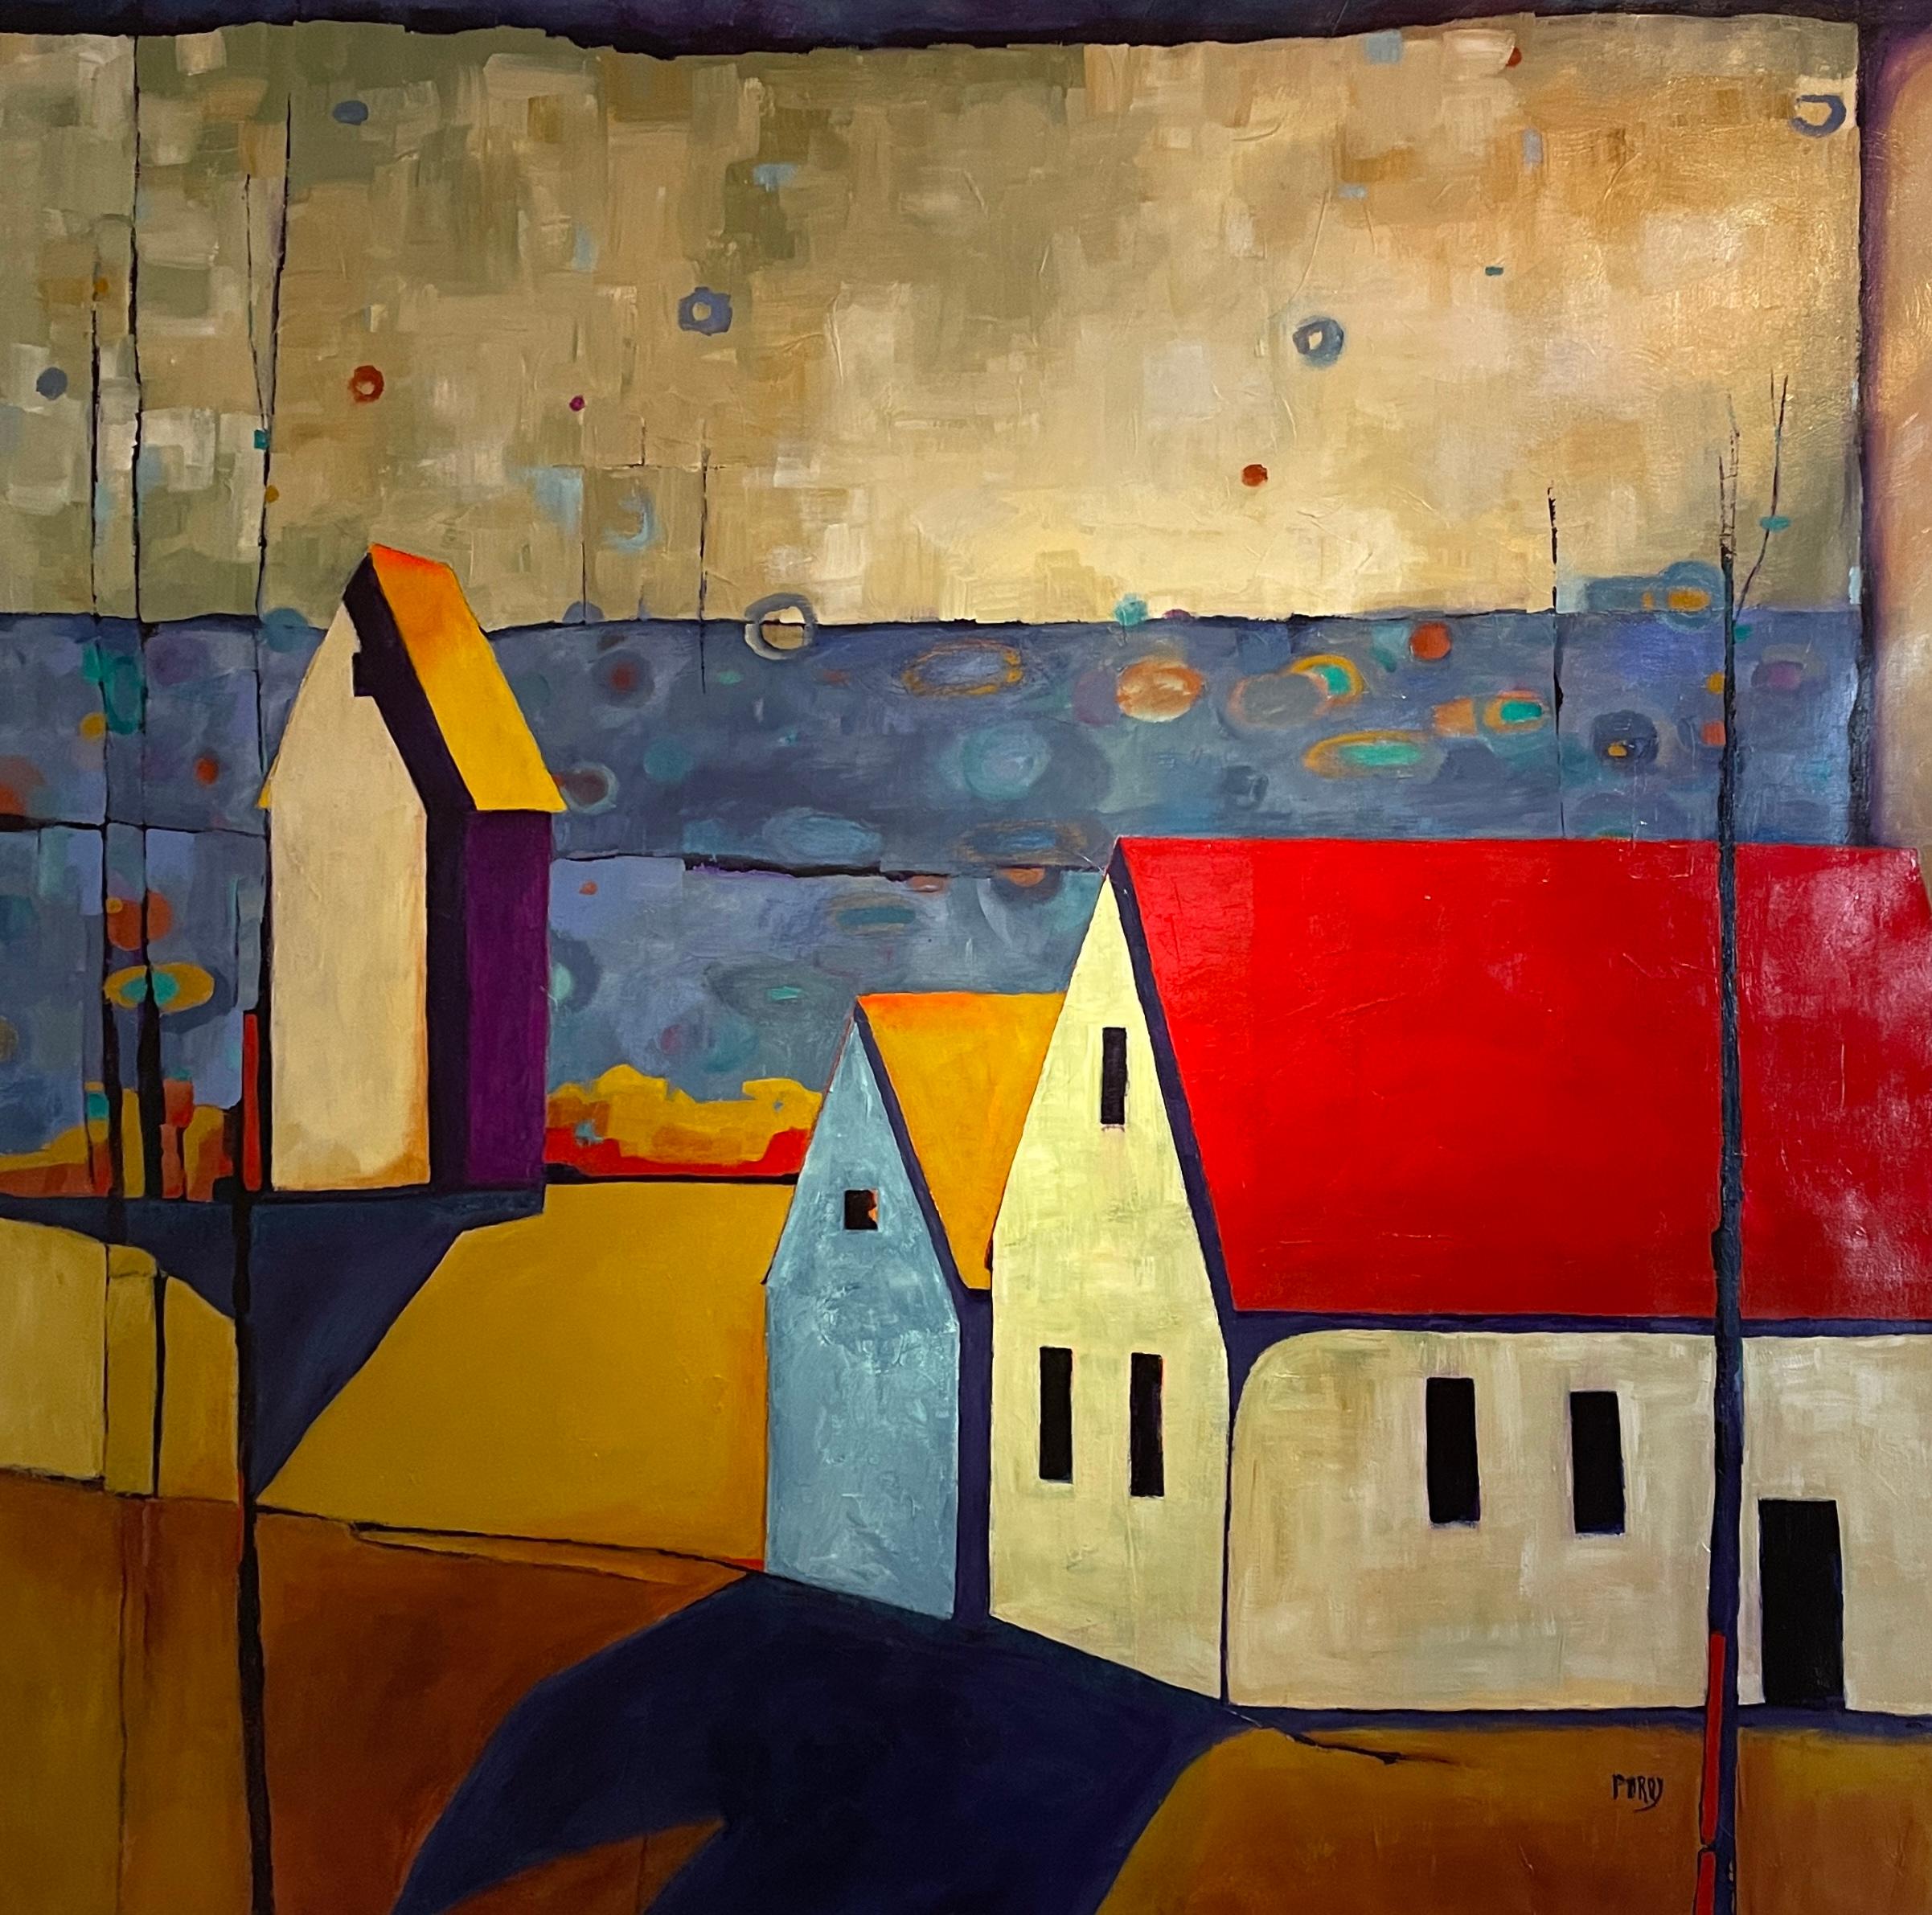 'Twilight Vista' Landscape of Serene Huts amidst an Abstract Sky by Maria Poroy